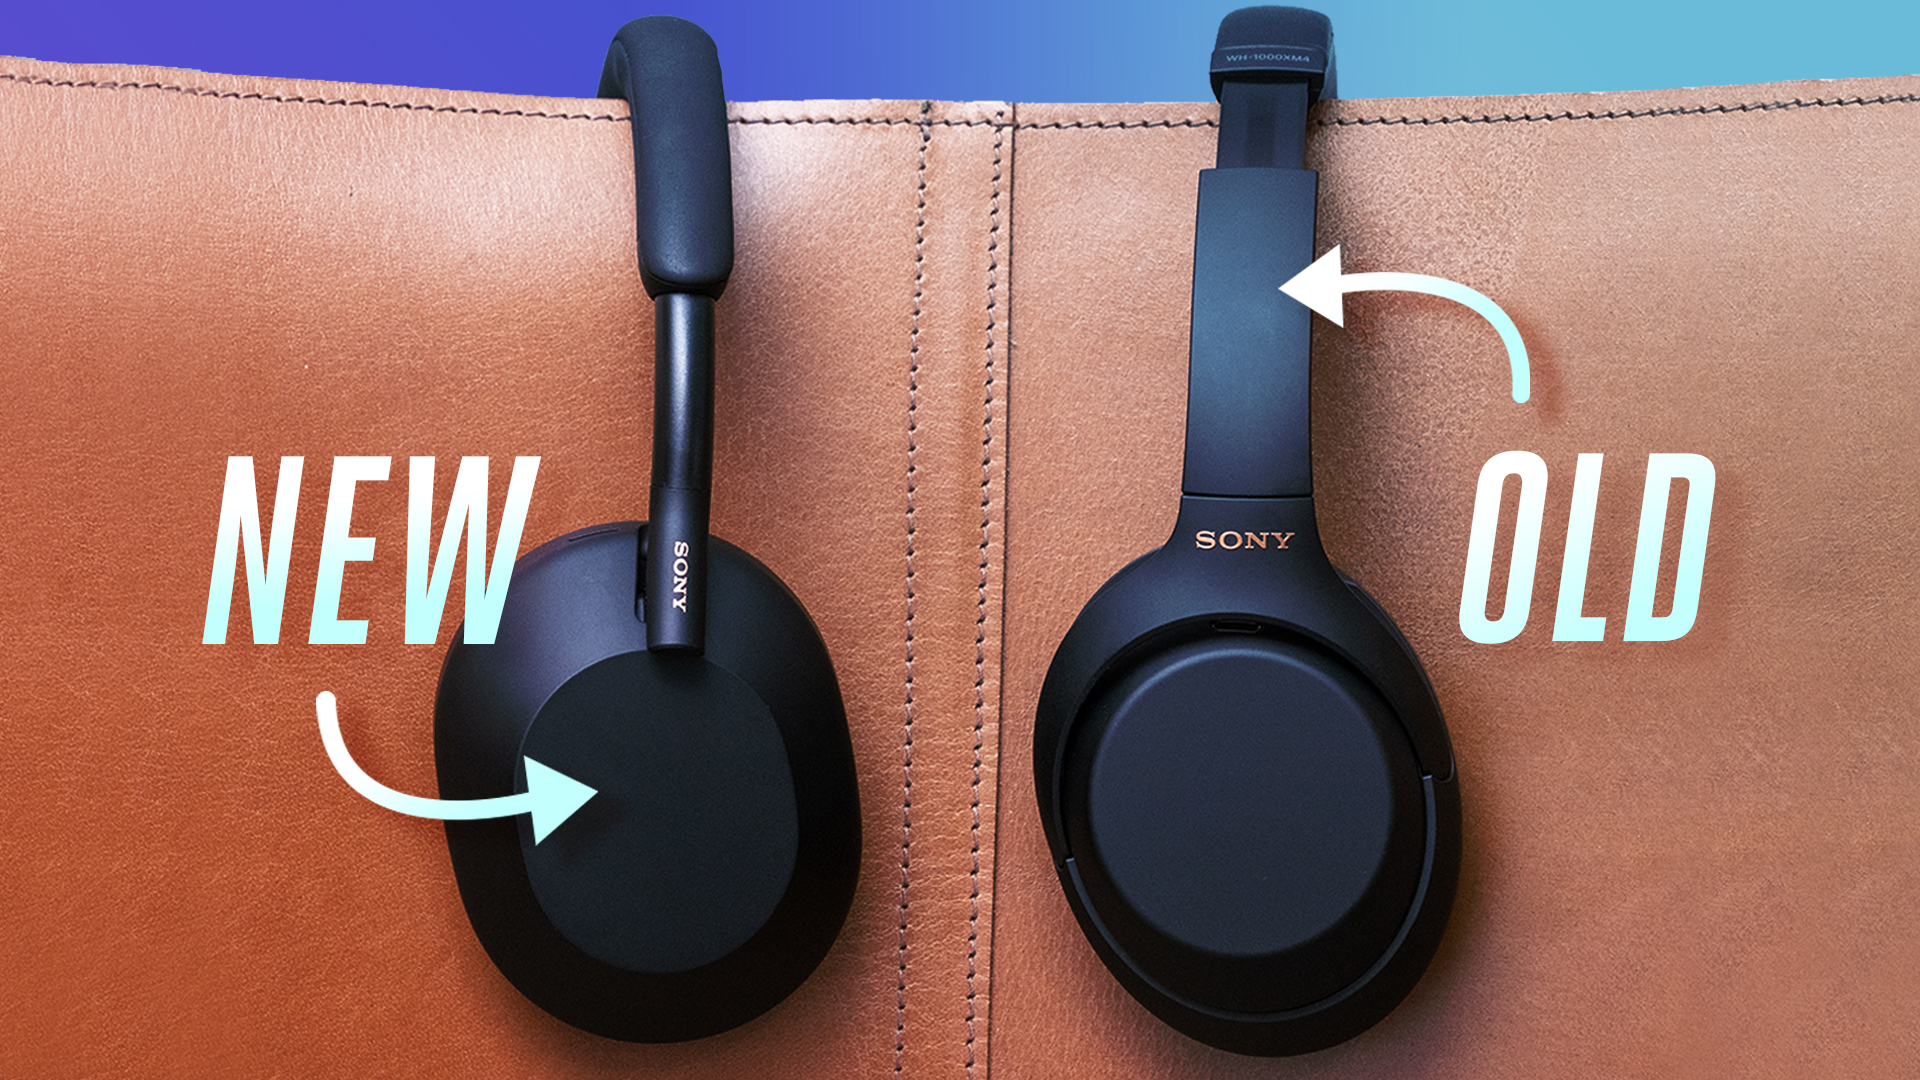 Sony's WH-XB910N headphones go big on bass without breaking the bank